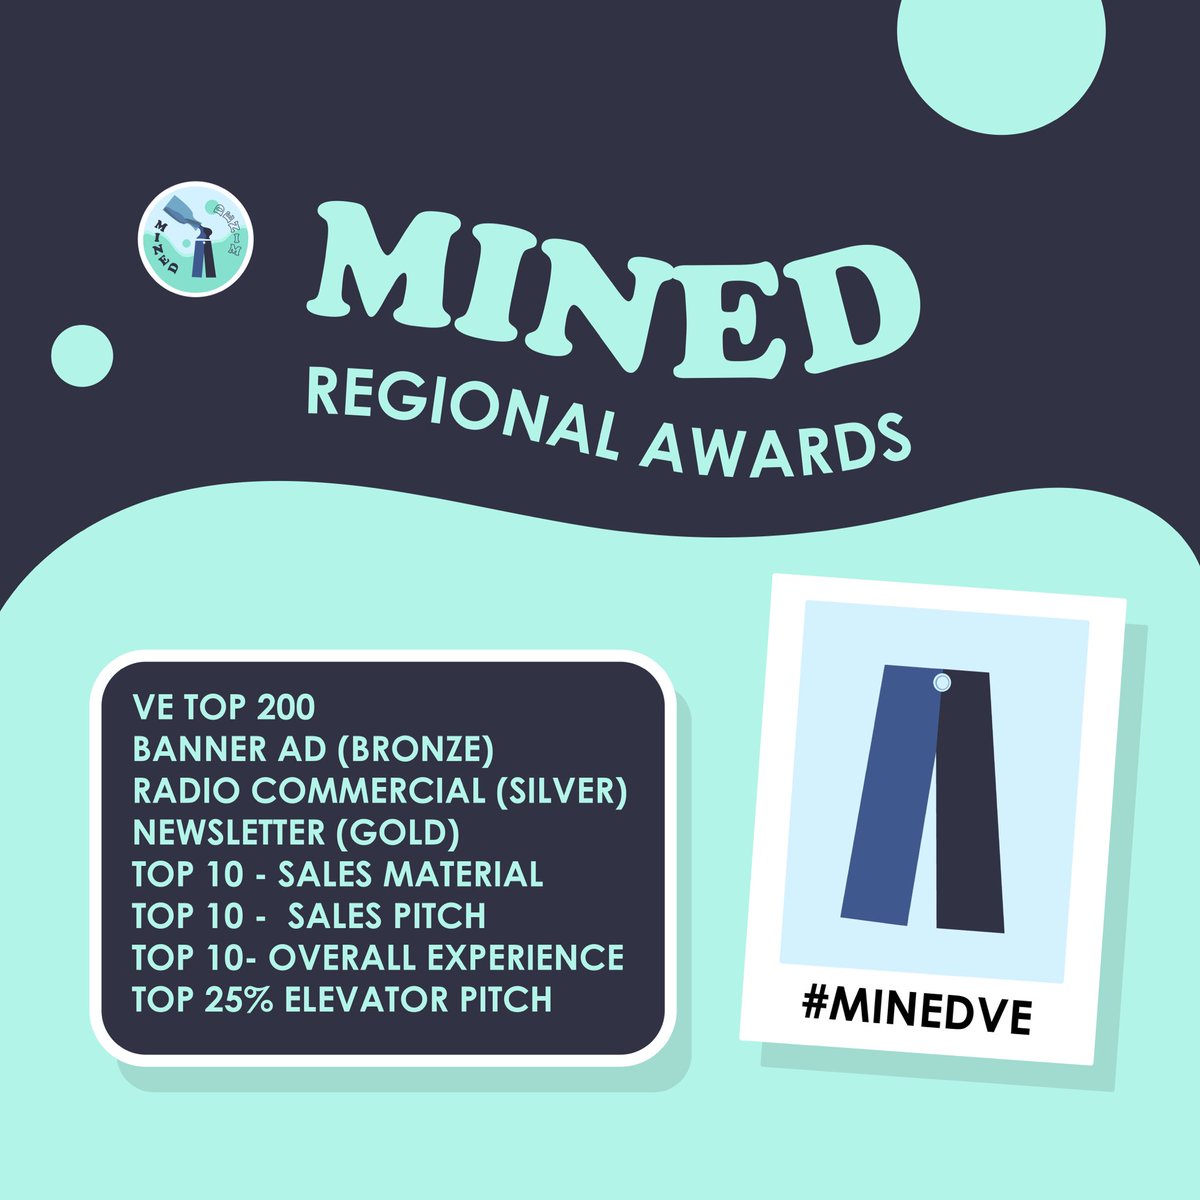 An exciting day at the Awards Ceremony! MINED is super stoked and looking forward to more future competitions 🤩🥳
—
@veinternational @fvasb @FVHSbarons @fvhsbbn @BaronNews @DrMorganSmith #veinternational #virtualenterprise #virtualenterpriseinternational #minedve